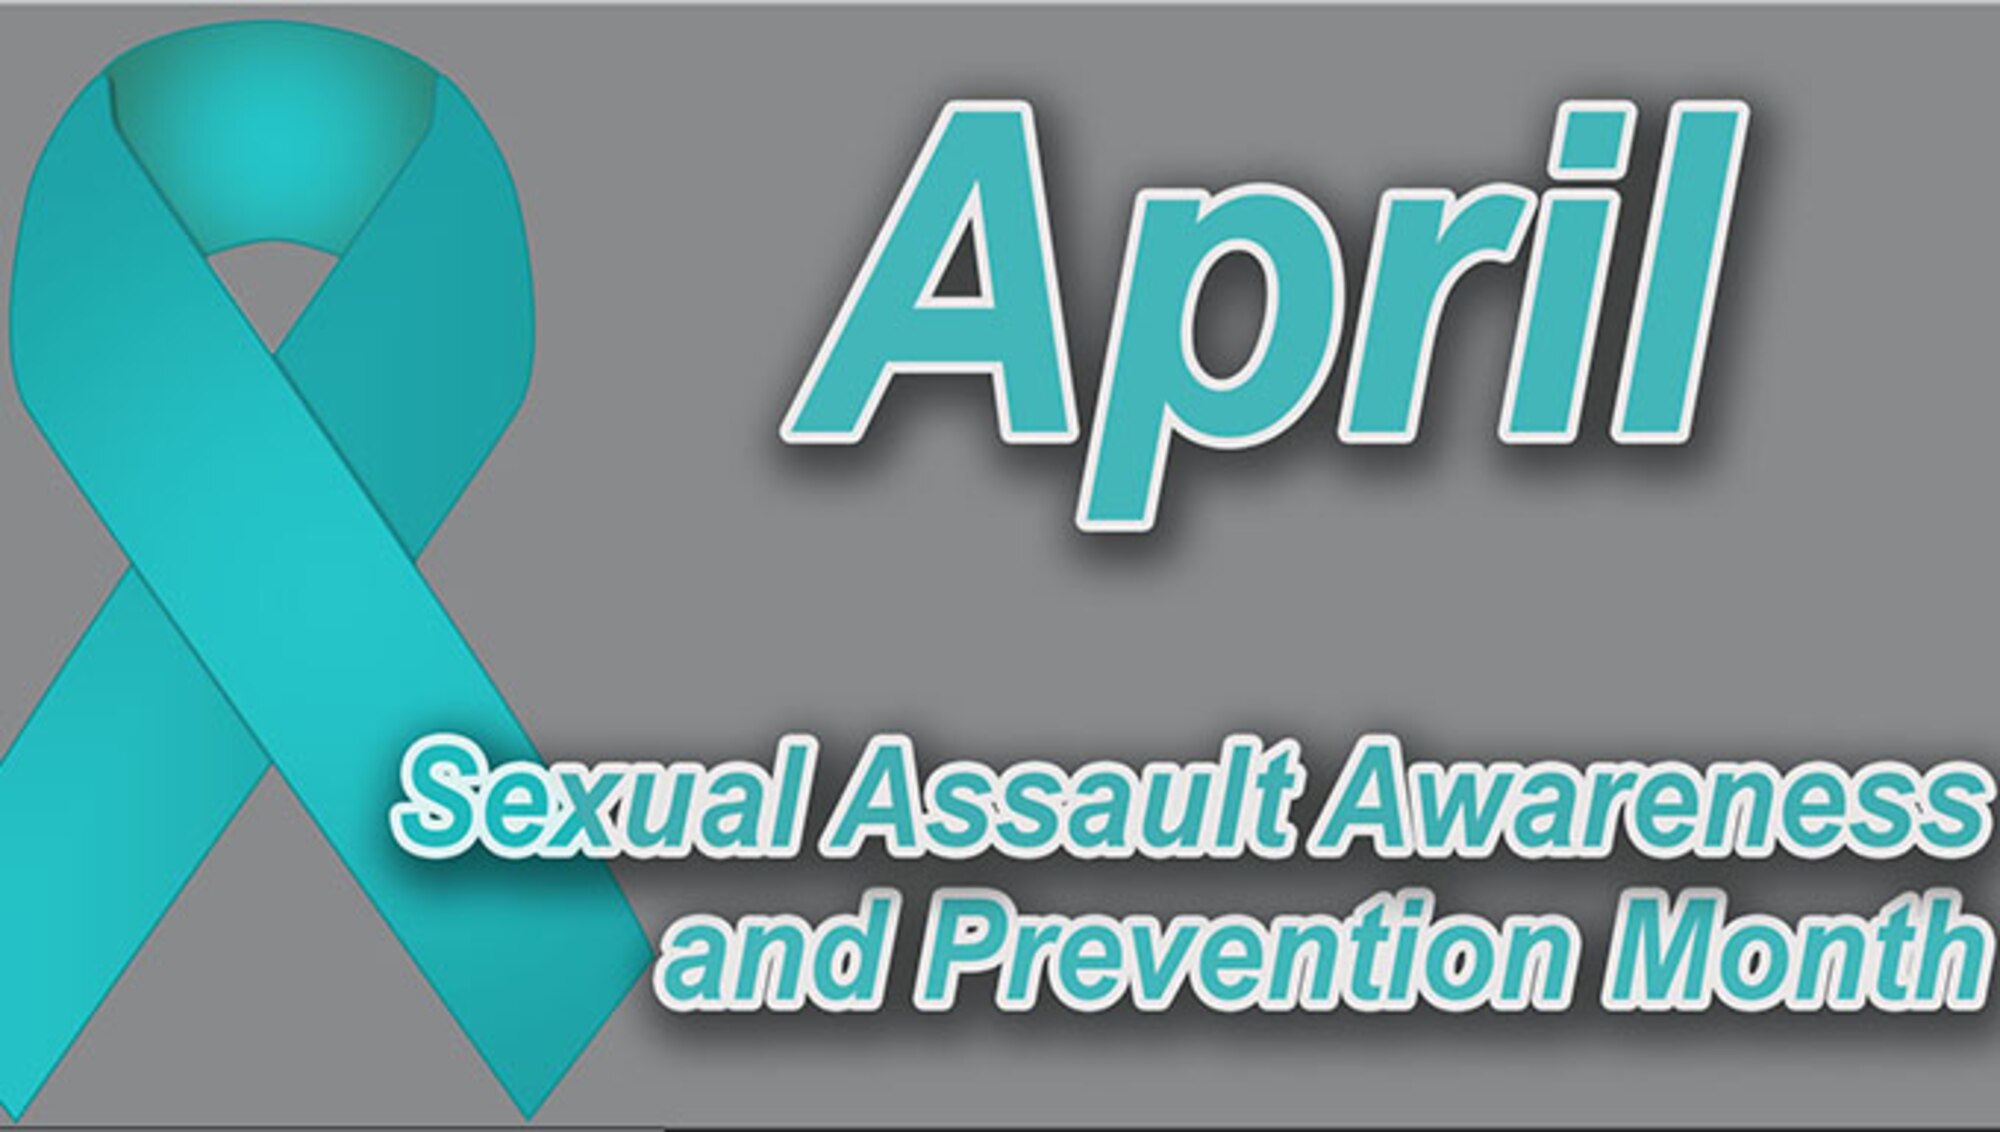 Altus Air Force Base is holding several events throughout April in honor of Sexual Assault Awareness Month. The intent of the events is to spread awareness and show support for victims of sexual assault. (U.S. Air Force graphic by Senior Airman Nathan Clark/Released)